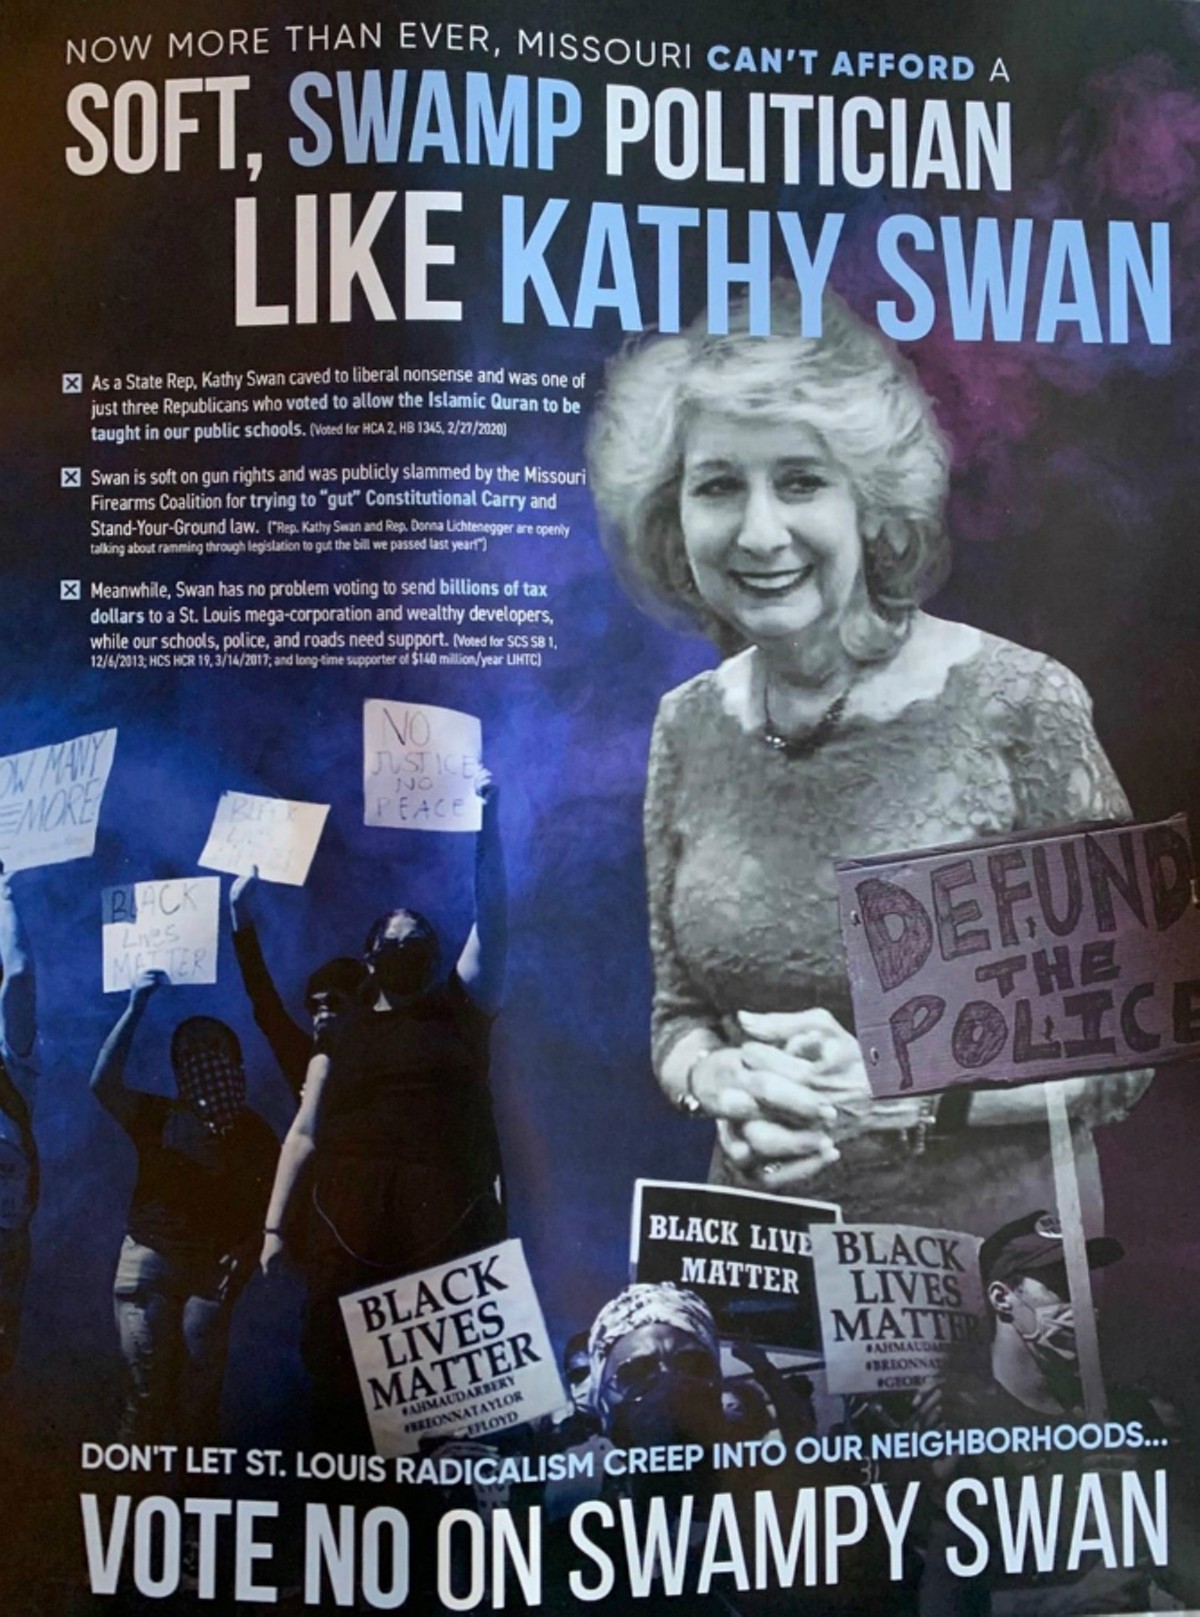 A campaign flyer targeting "St. Louis radicalism" has a curious source of funding.